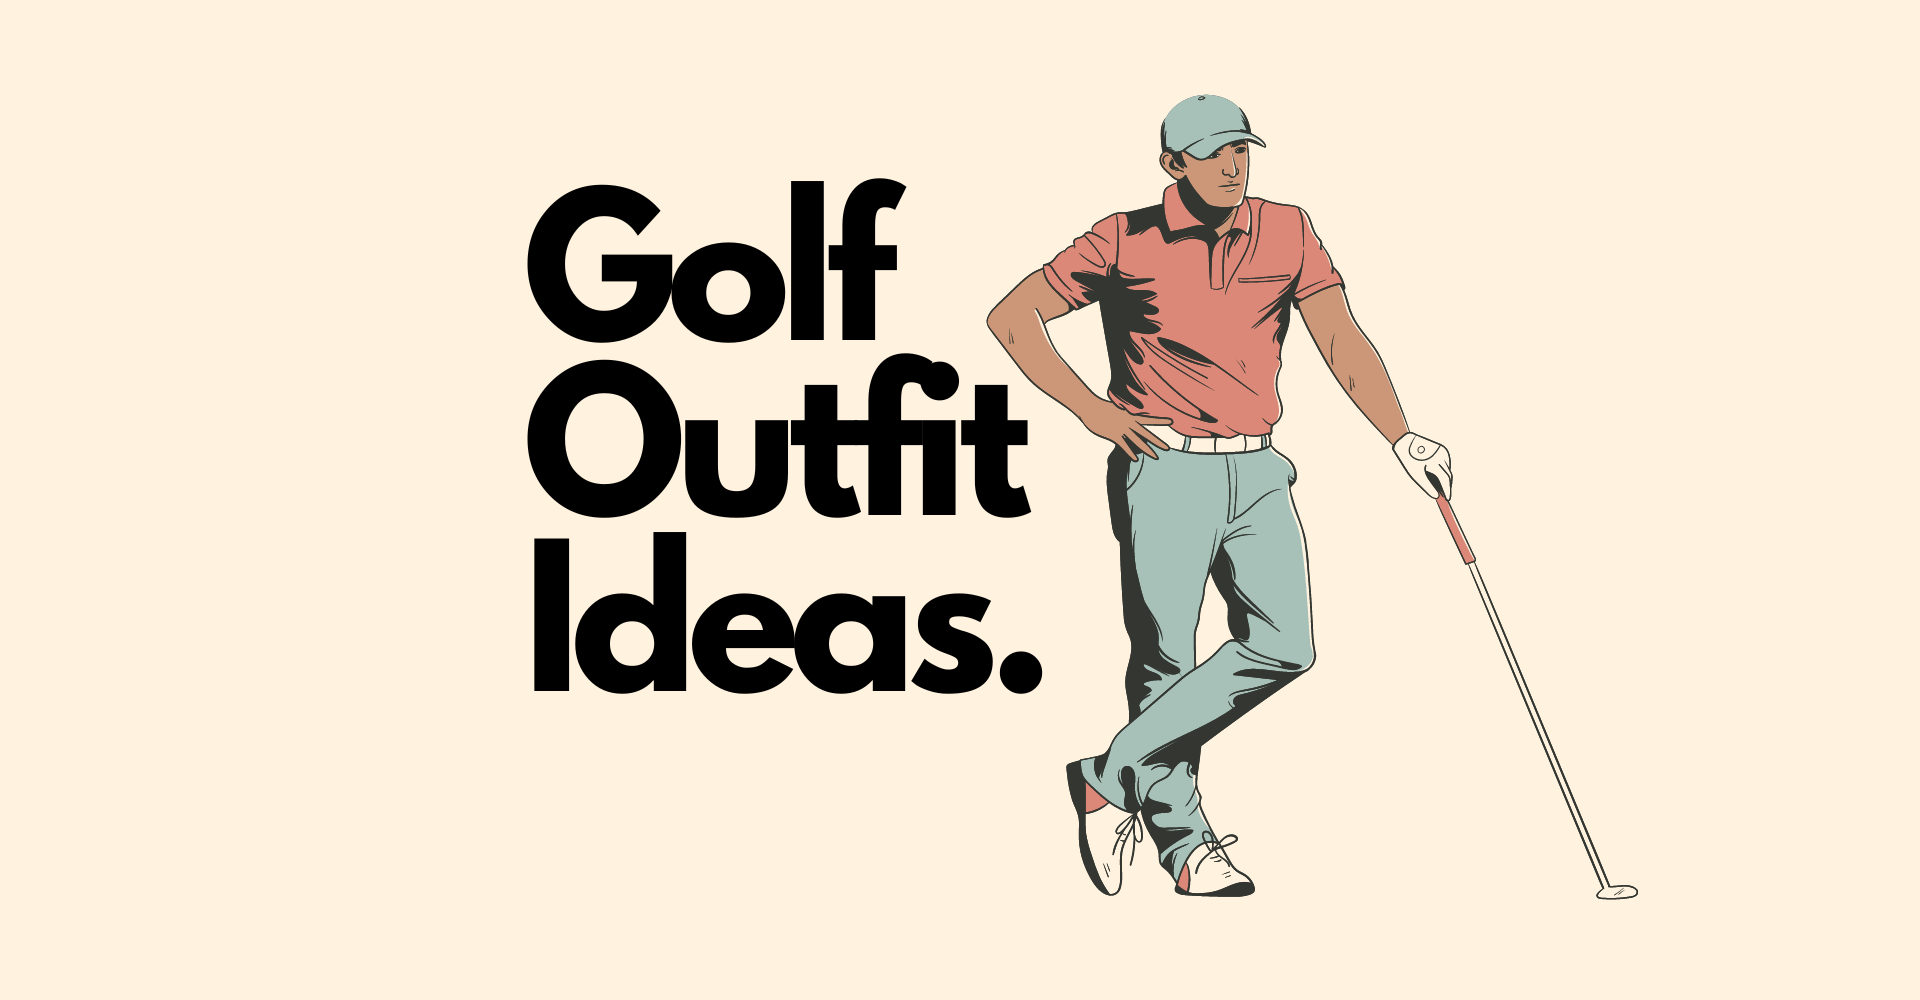 men's golf fashion Would use for a formal golf outing